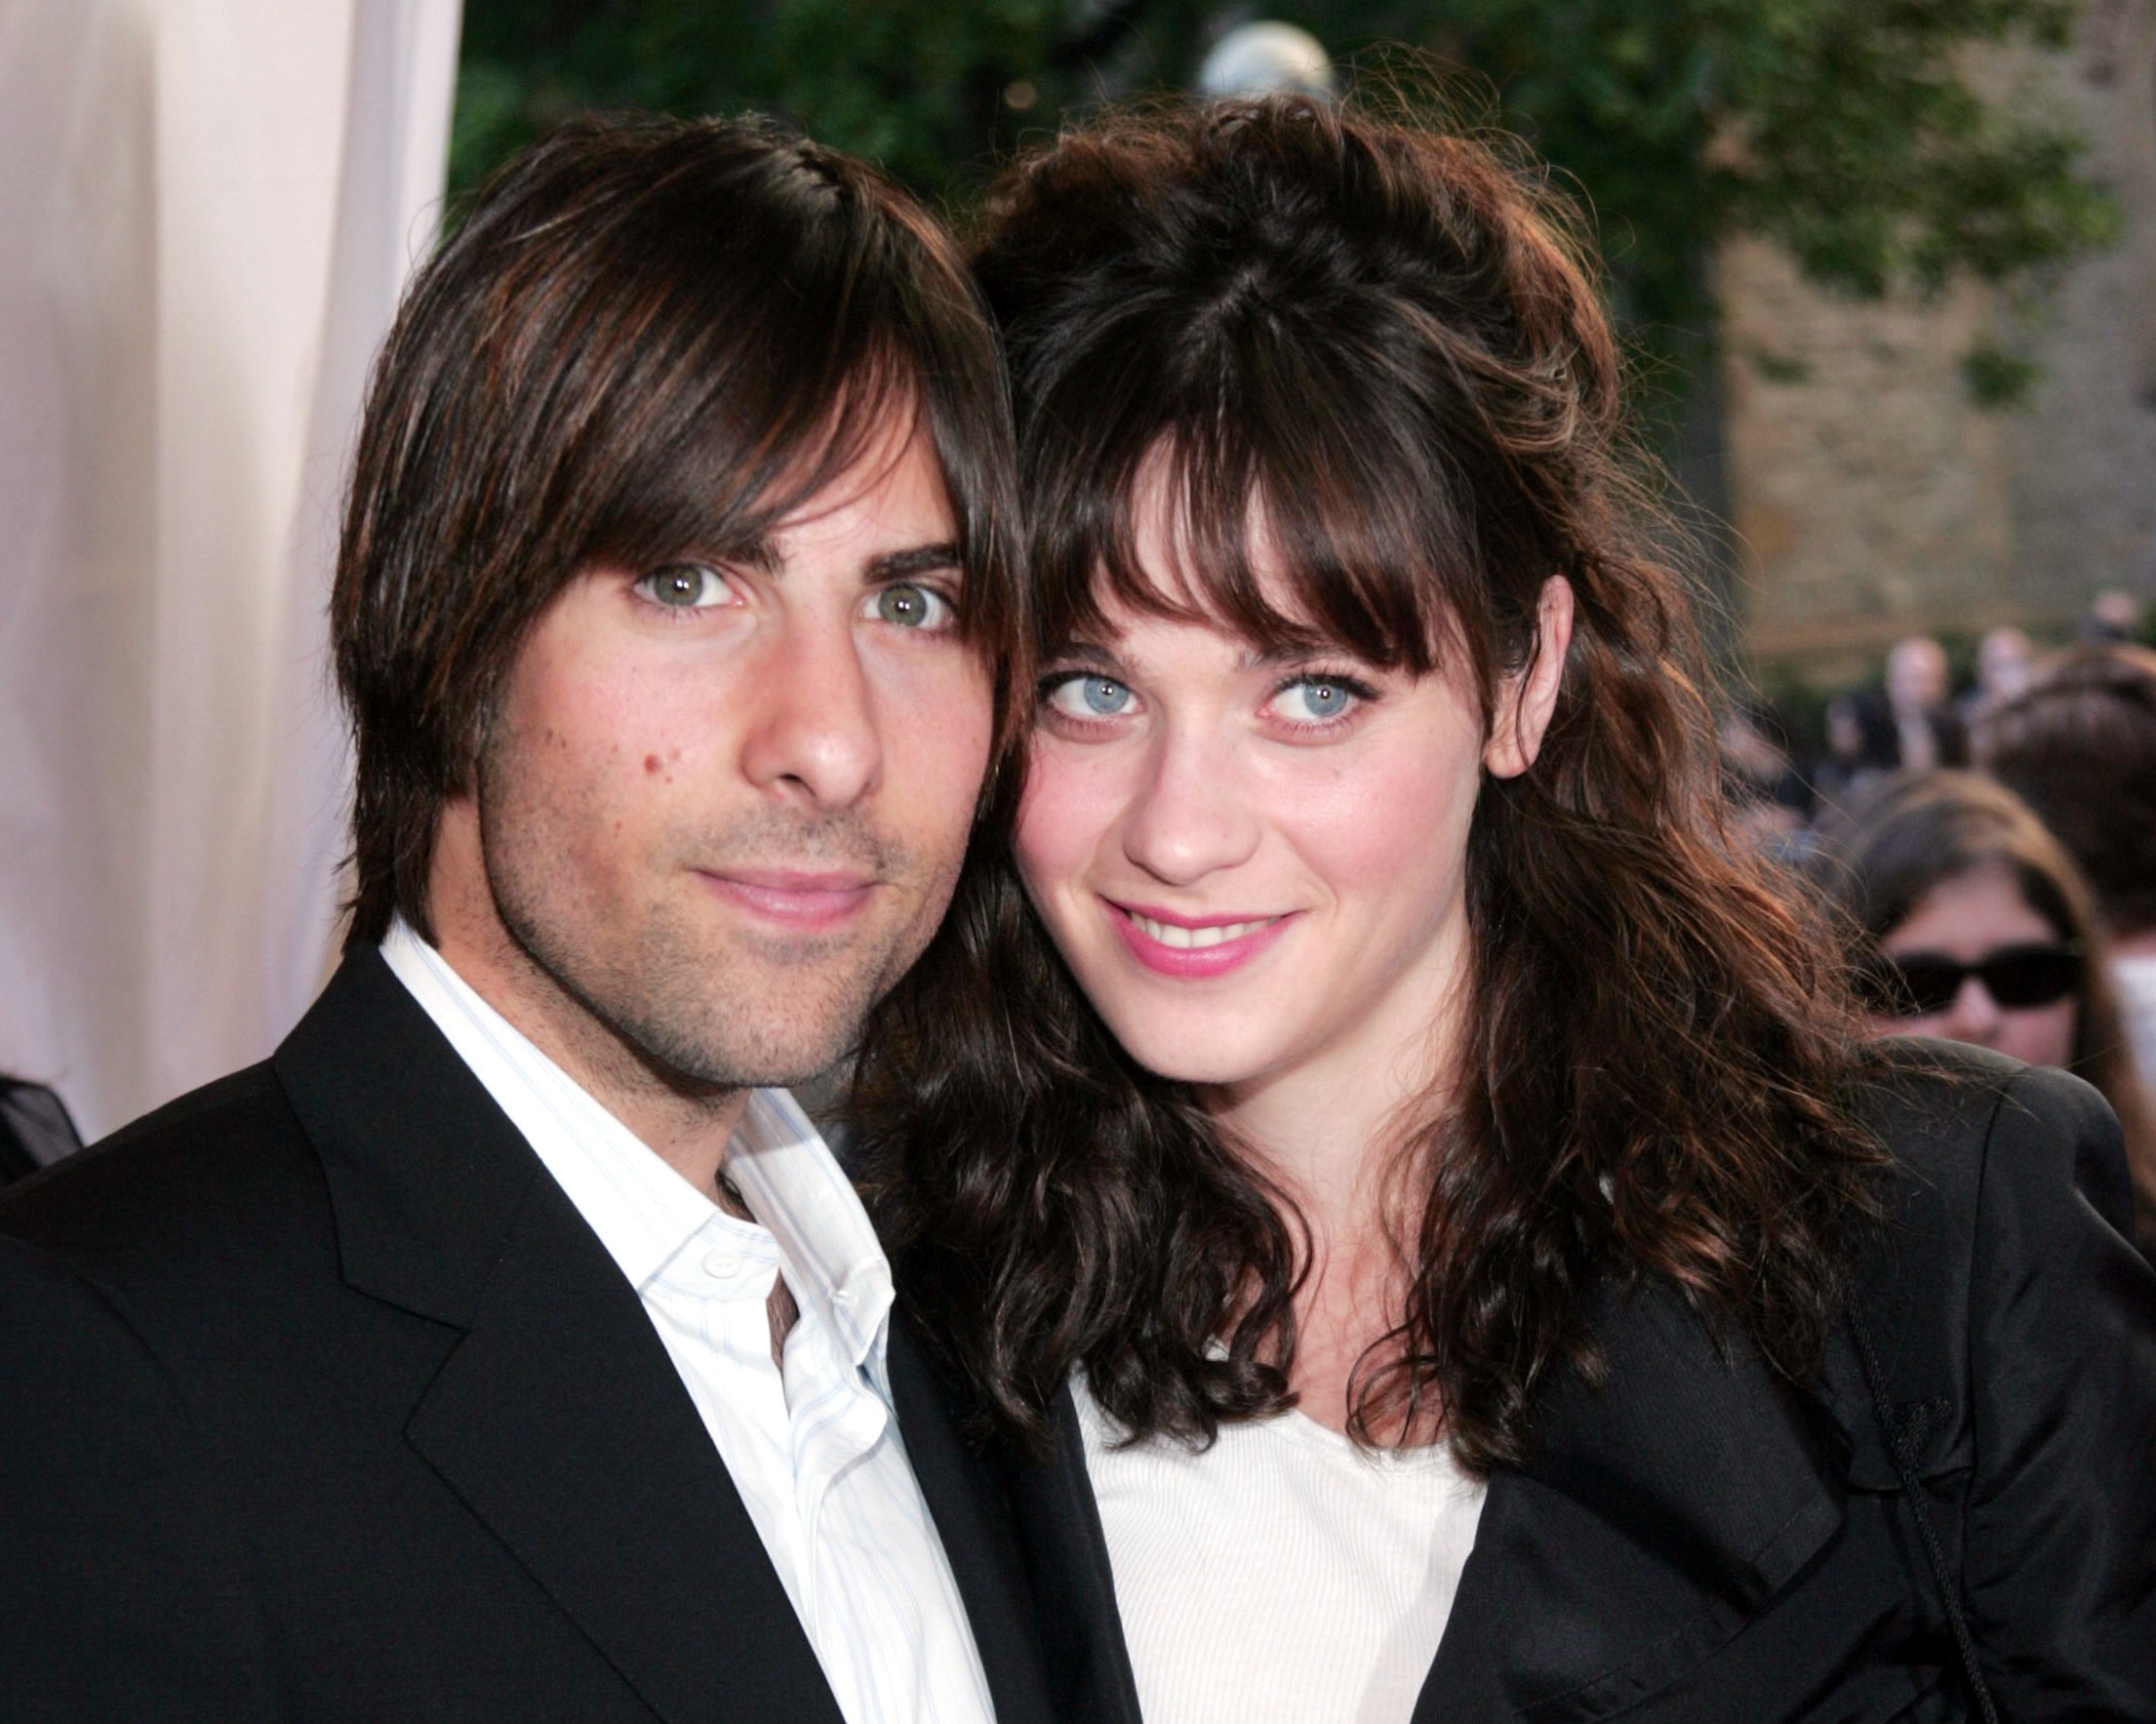 Jason Schwartzman and Zooey Deschanel attend the gala premiere for "I (Heart) Huckabees" at Roy Thomson Hall, during the 2004 Toronto International Film Festival, on September 10, 2004, in Toronto, Canada. | Source: Getty Images